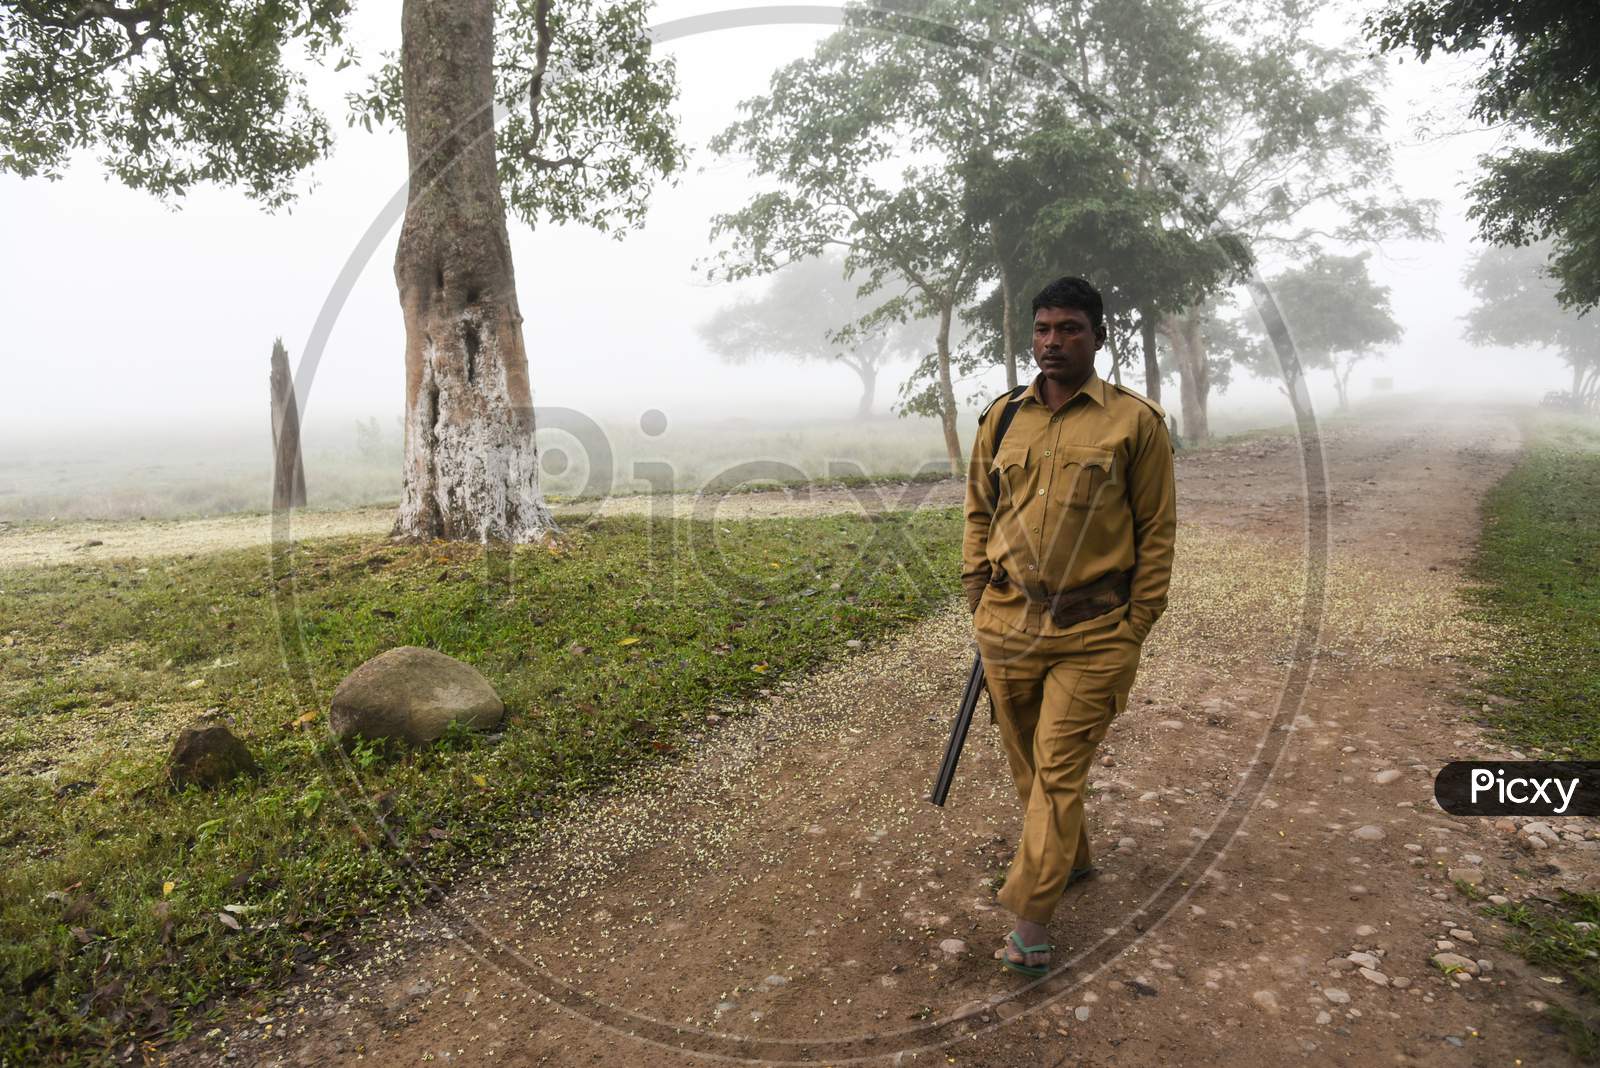 A Forest Guard On Duty In A Foggy Morning In Kaziranga National Park, In Golaghat District Of Assam In India